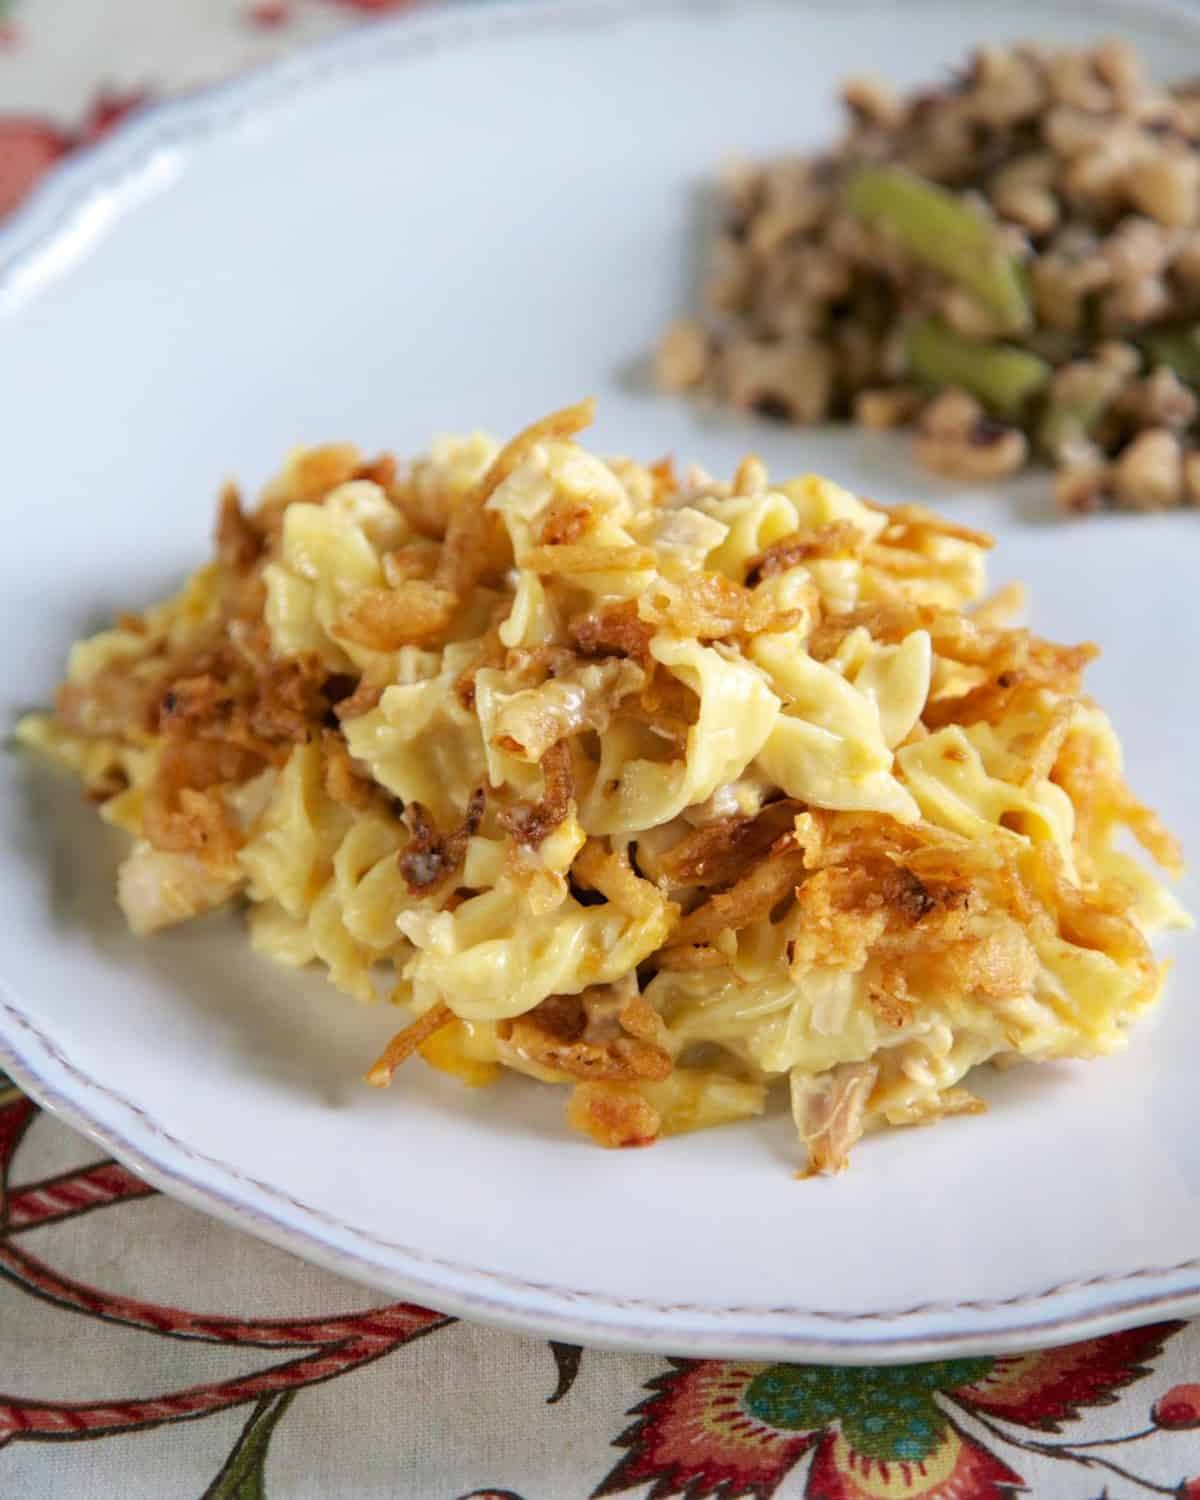 French Onion Chicken Noodle Casserole Recipe - egg noodles, french onion dip, cream of chicken soup, cheese, chicken topped with French fried onions - LOVE this casserole! Can make ahead and freezer for later. You can even split it between two foil pans - one for now and one for the freezer. Super easy main dish with only 6 ingredients that tastes great! Everyone RAVES about this casserole!